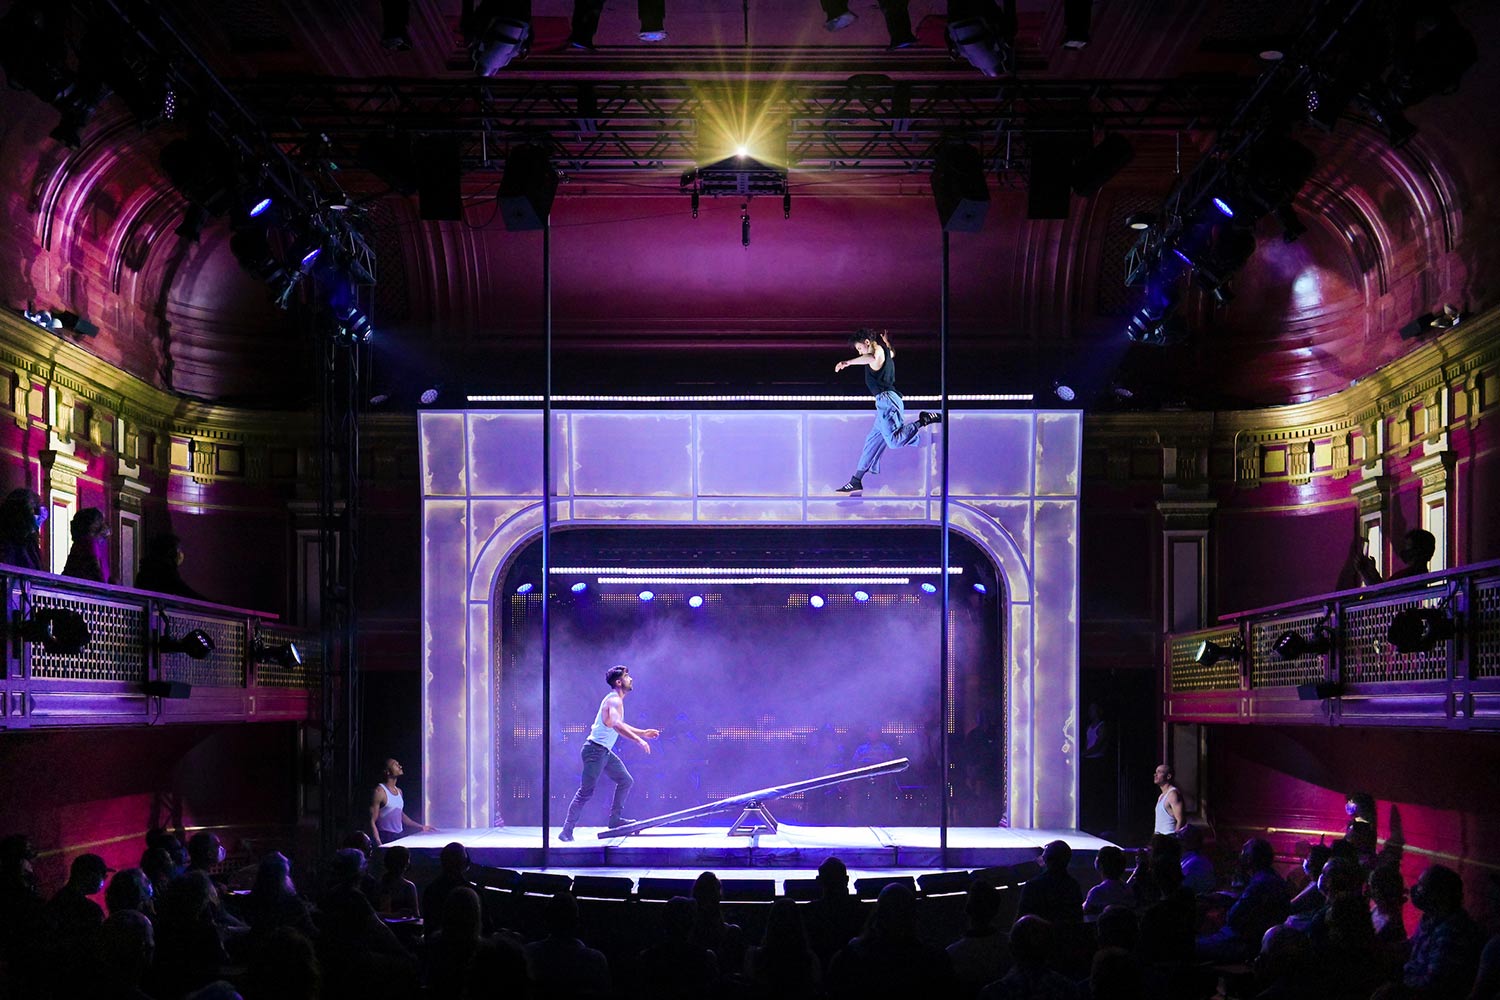 Two men on stage with one suspended into the air launched from a seesaw